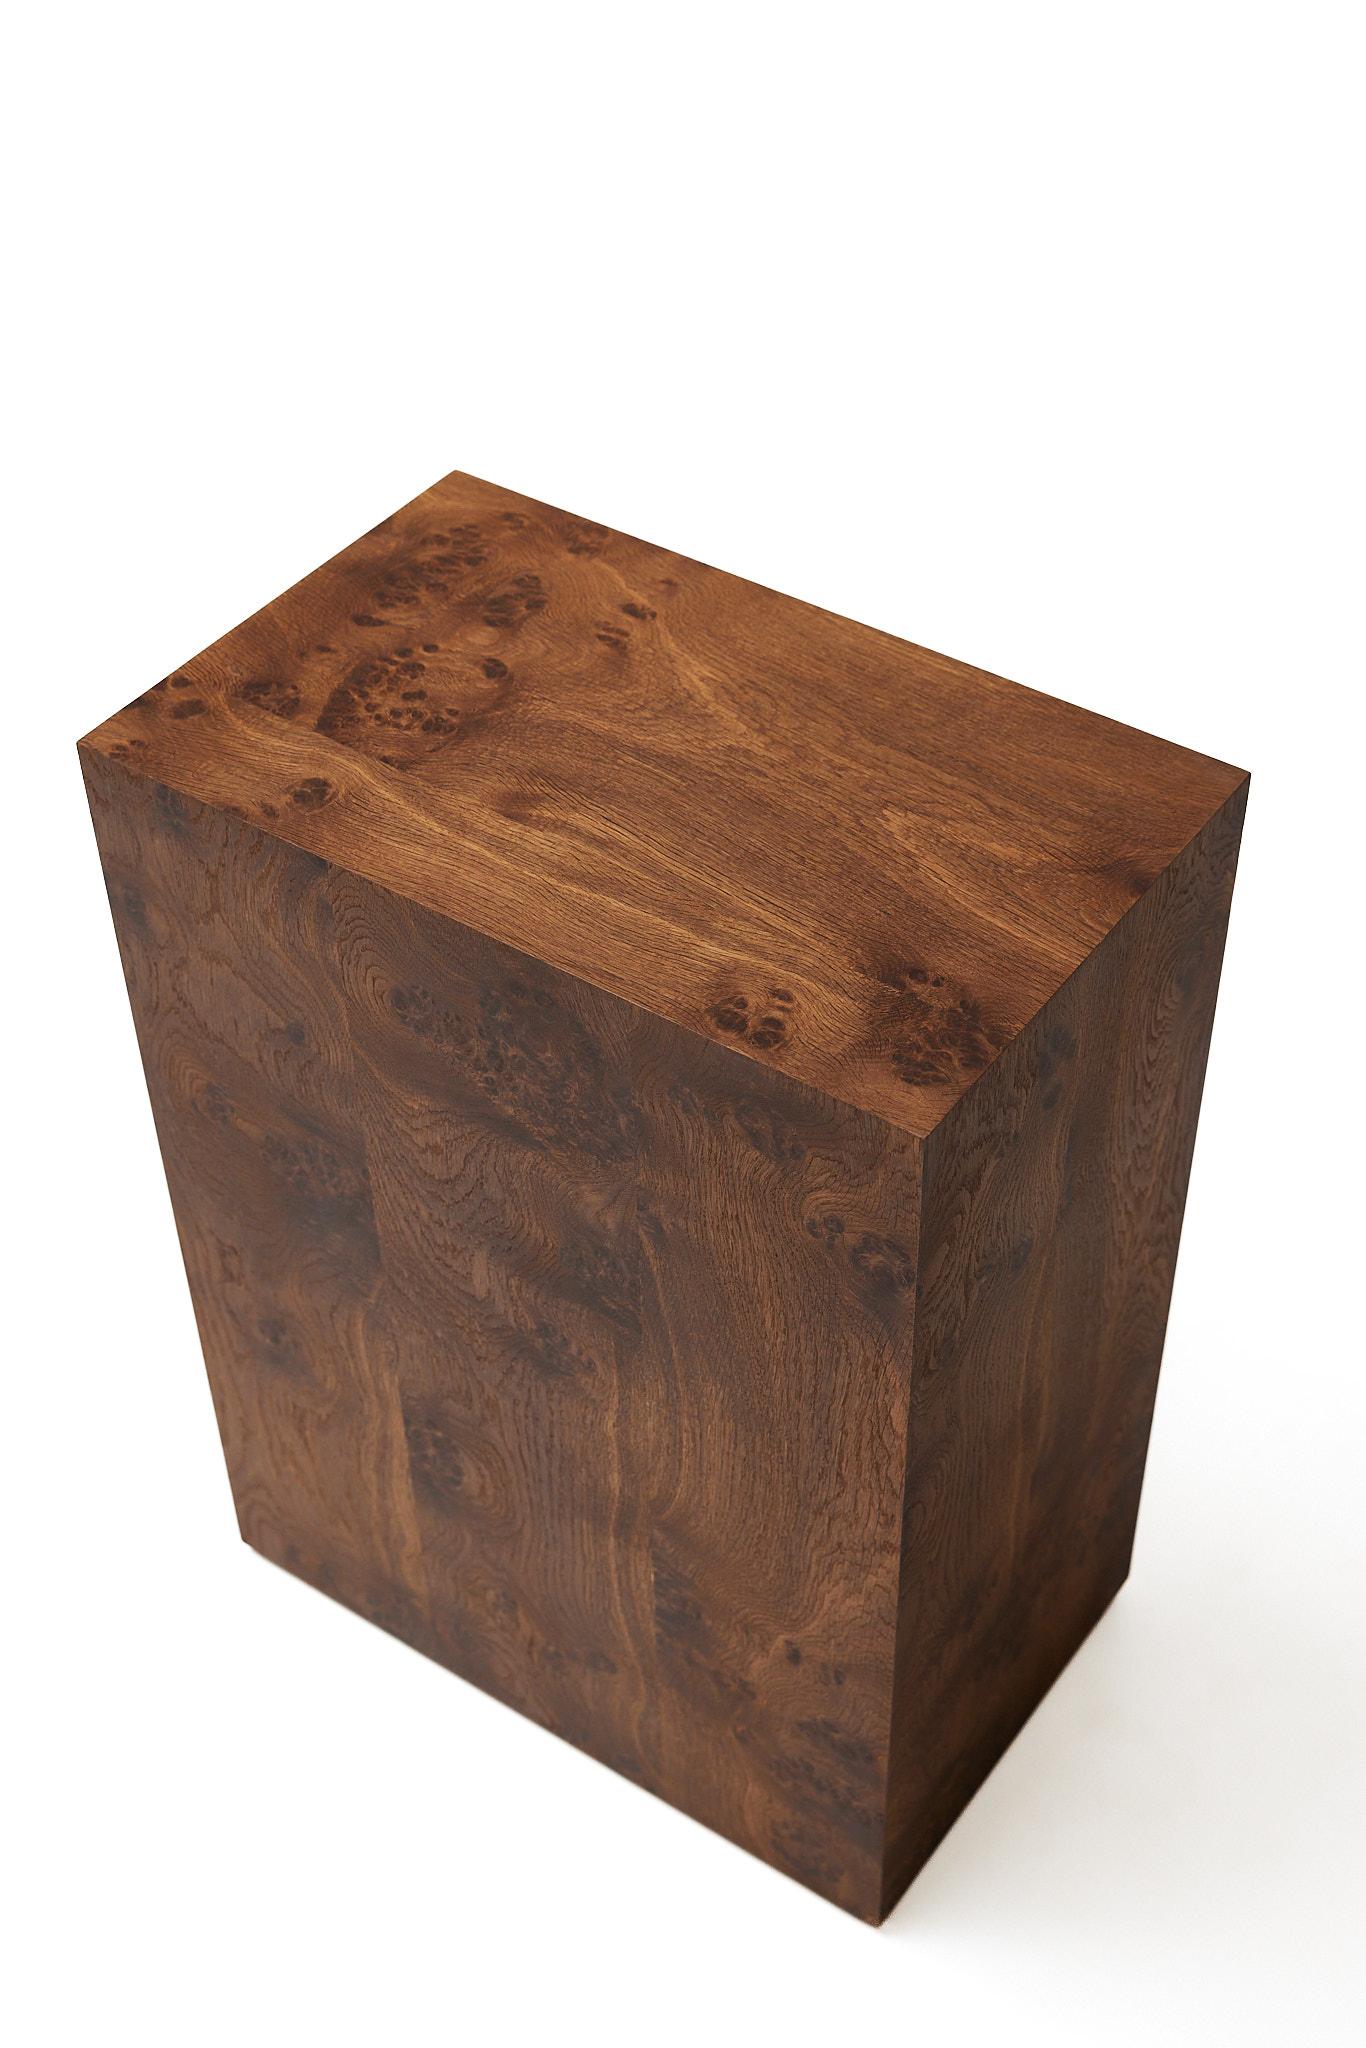 Scandinavian Modern Square wooden pedestal stand in smoked oak For Sale